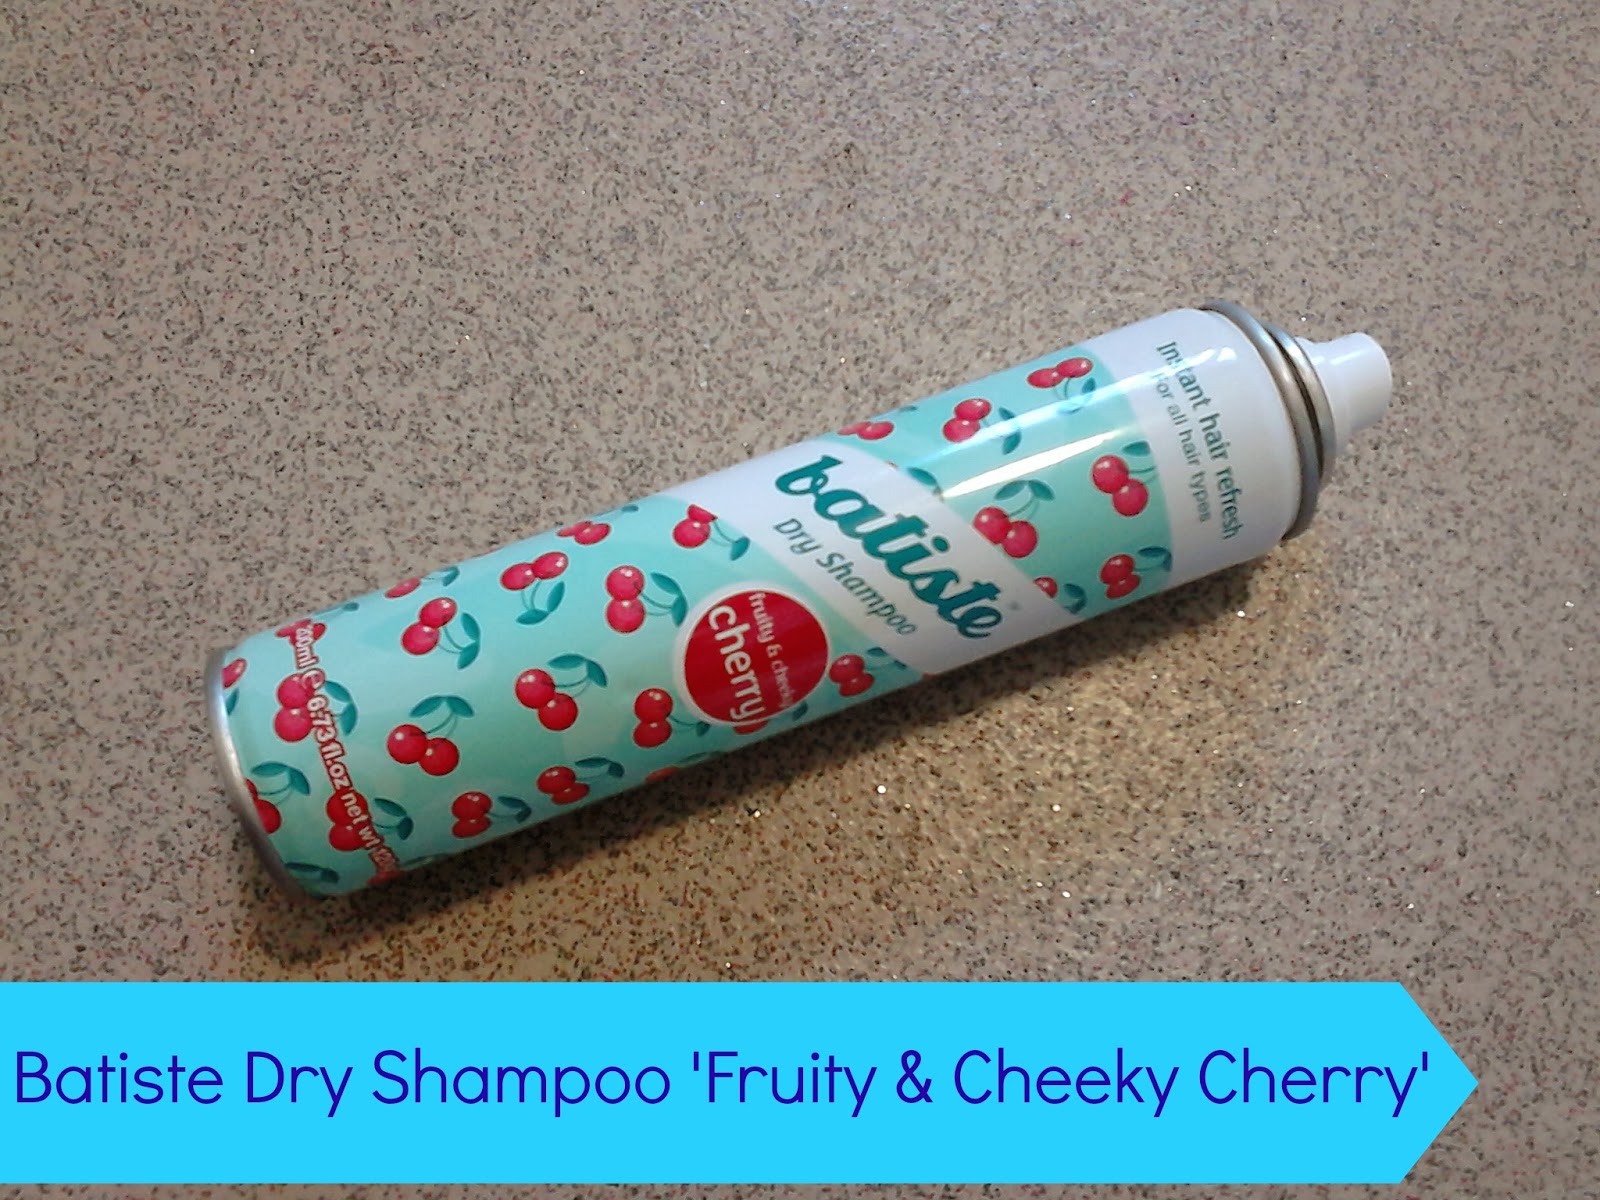 Batiste Dry Shampoo in Fruity and Cheeky Cherry 